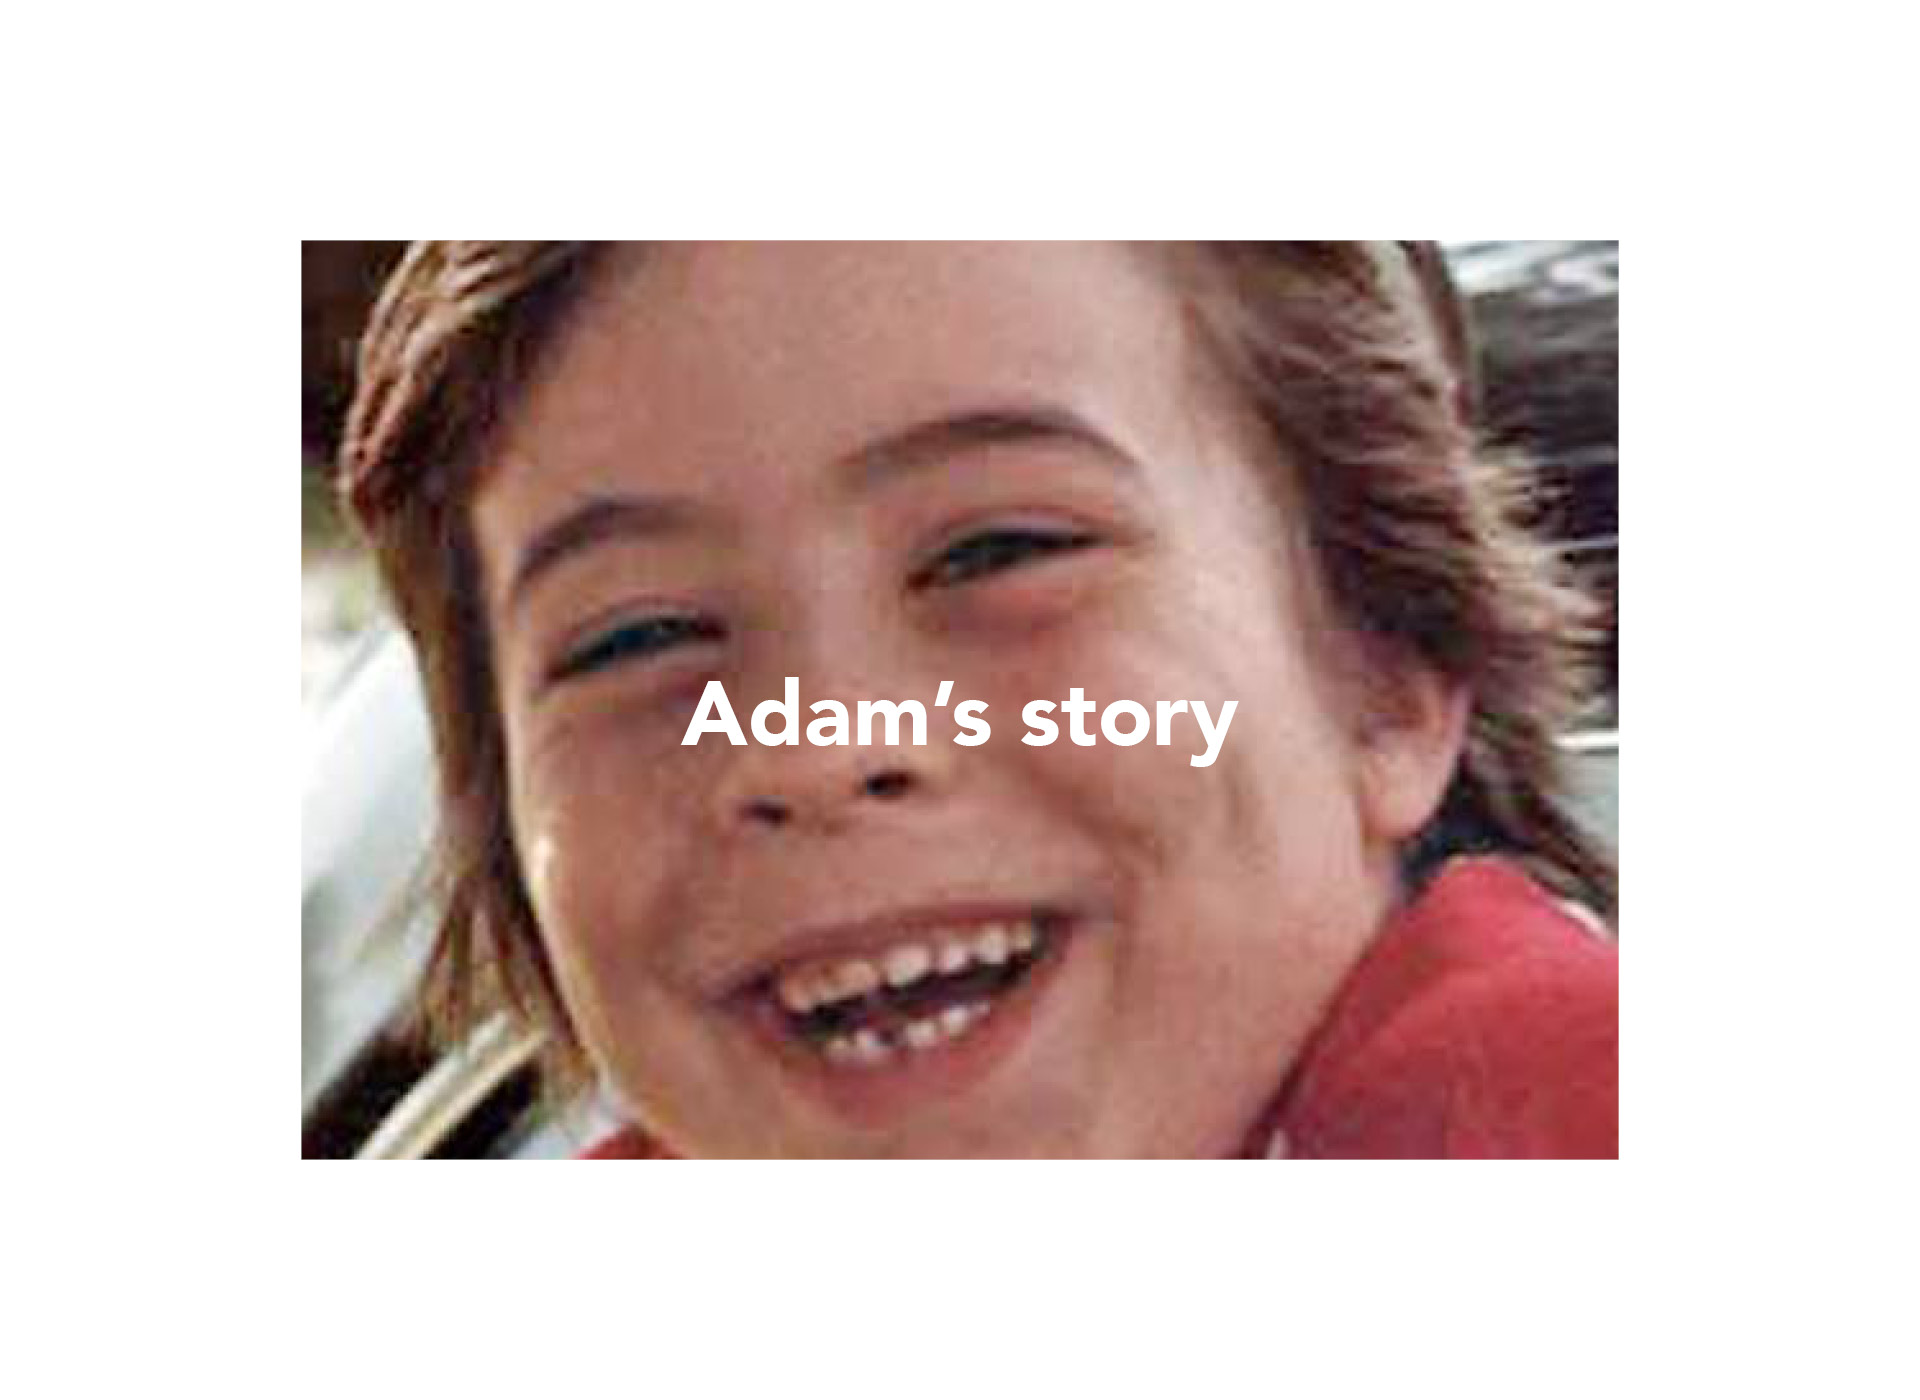 close up of adam's face, smiling, missing bottom tooth